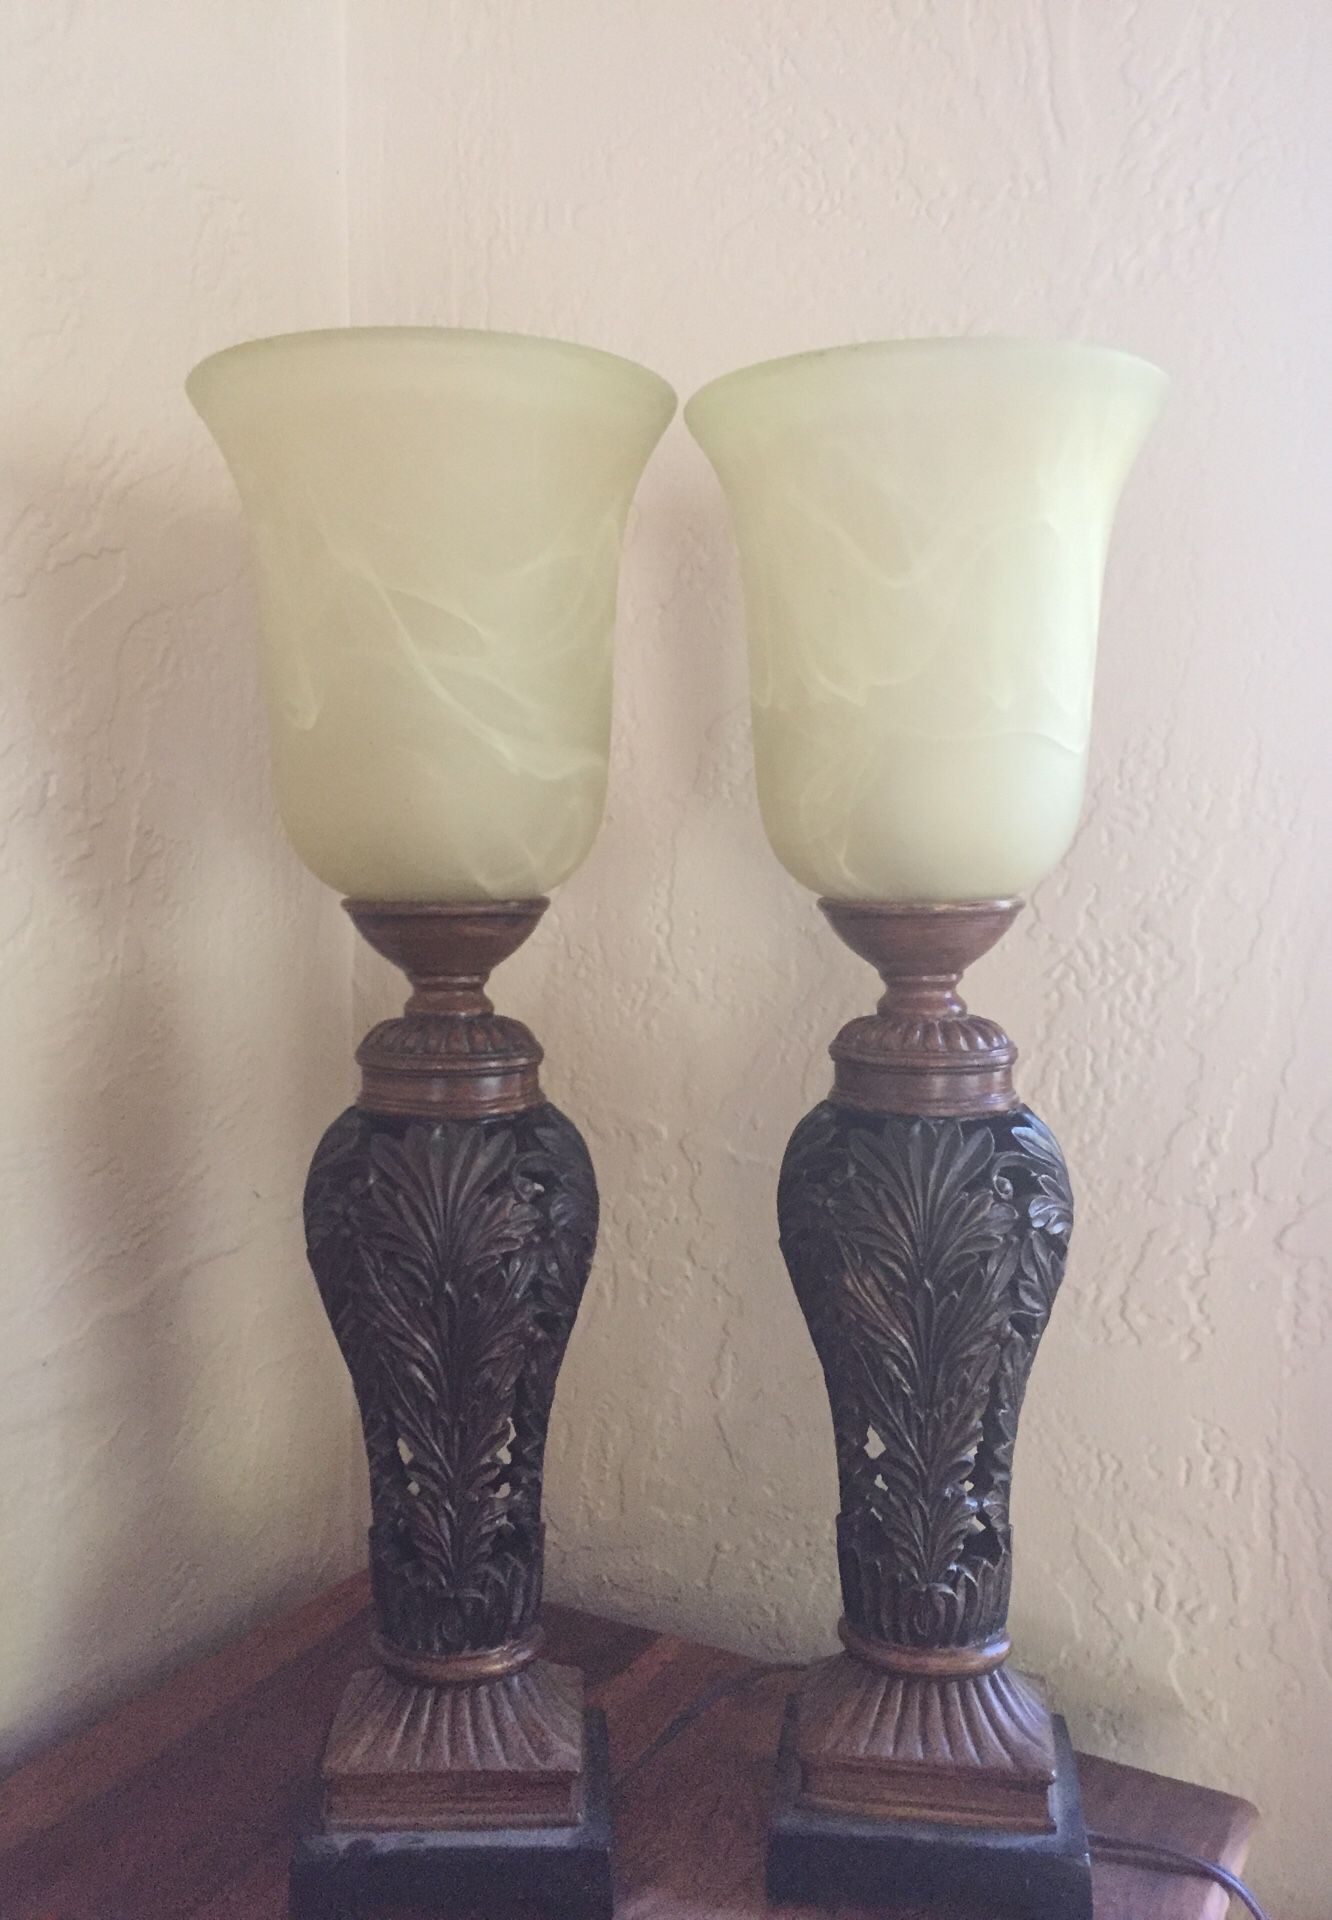 Brand new matching lamps - never used